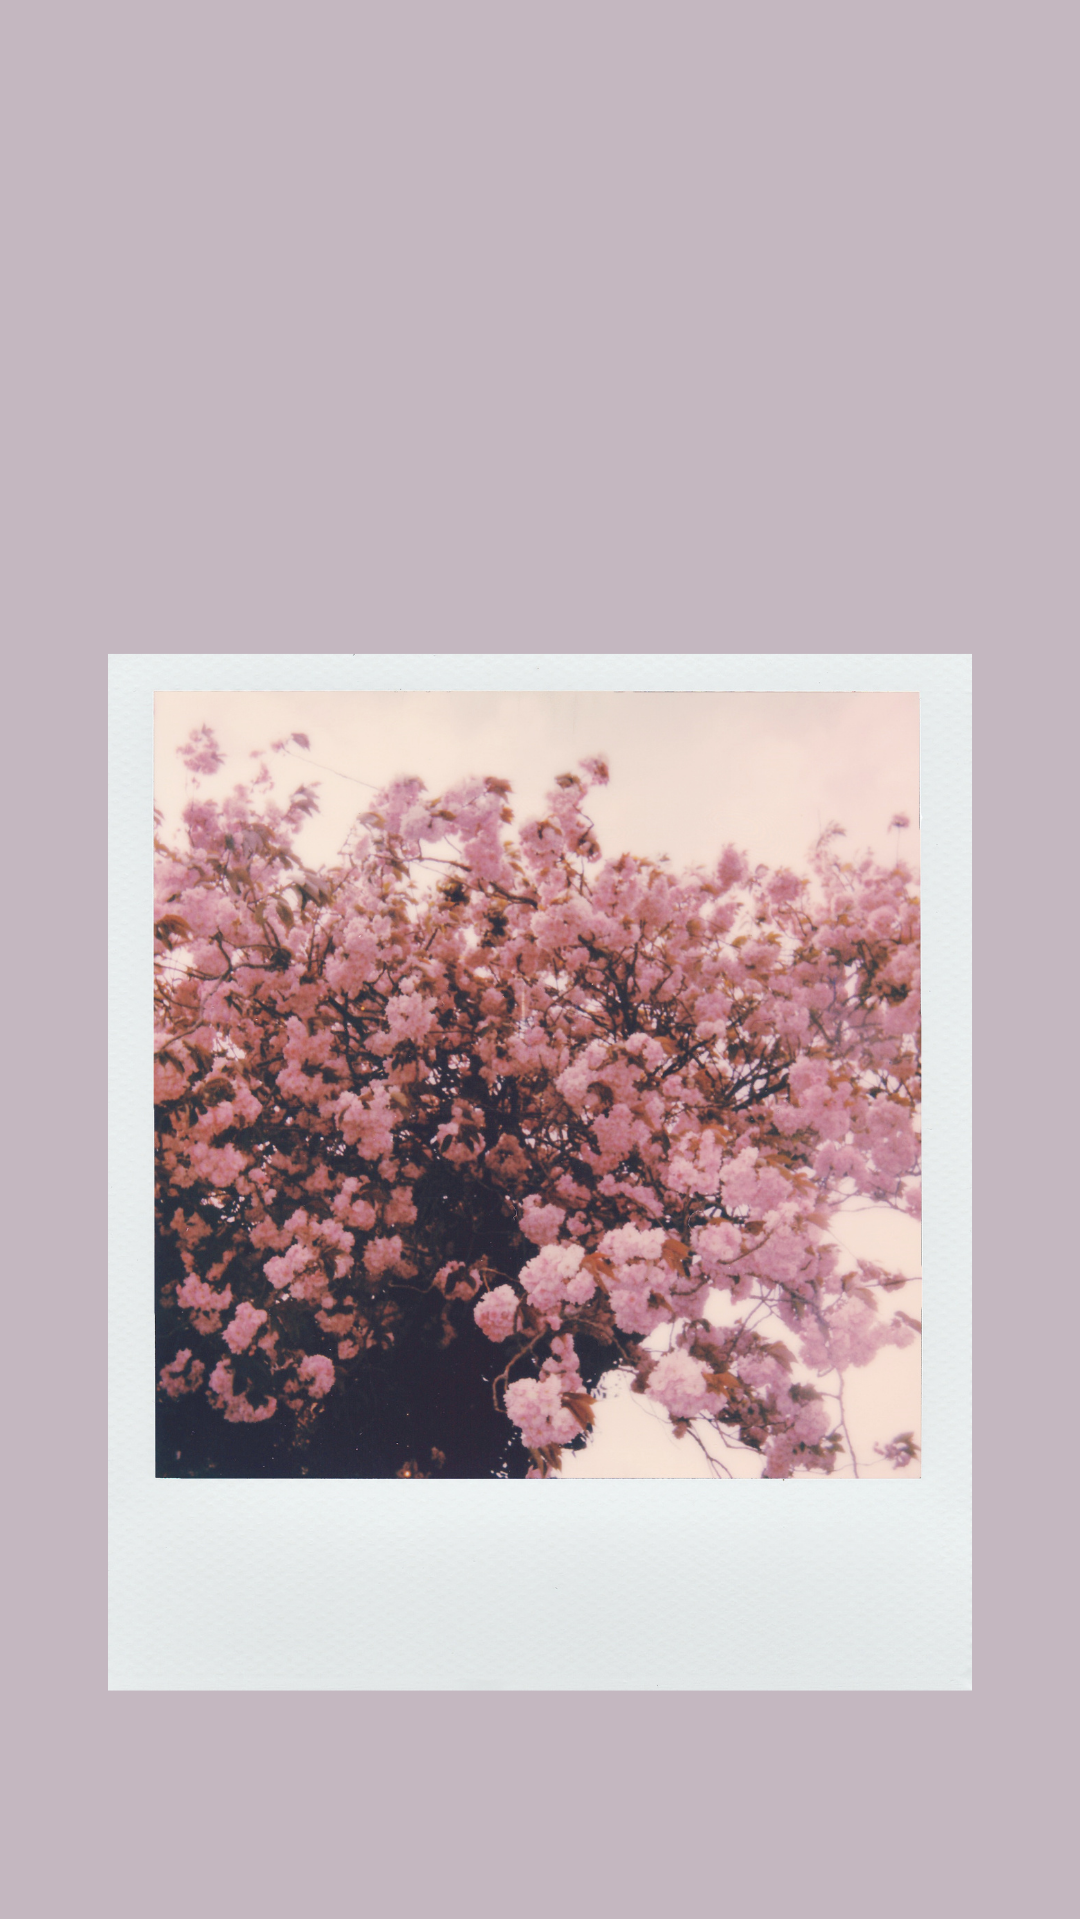 Free Aesthetic Phone Wallpapers for Spring   The Violet Journal